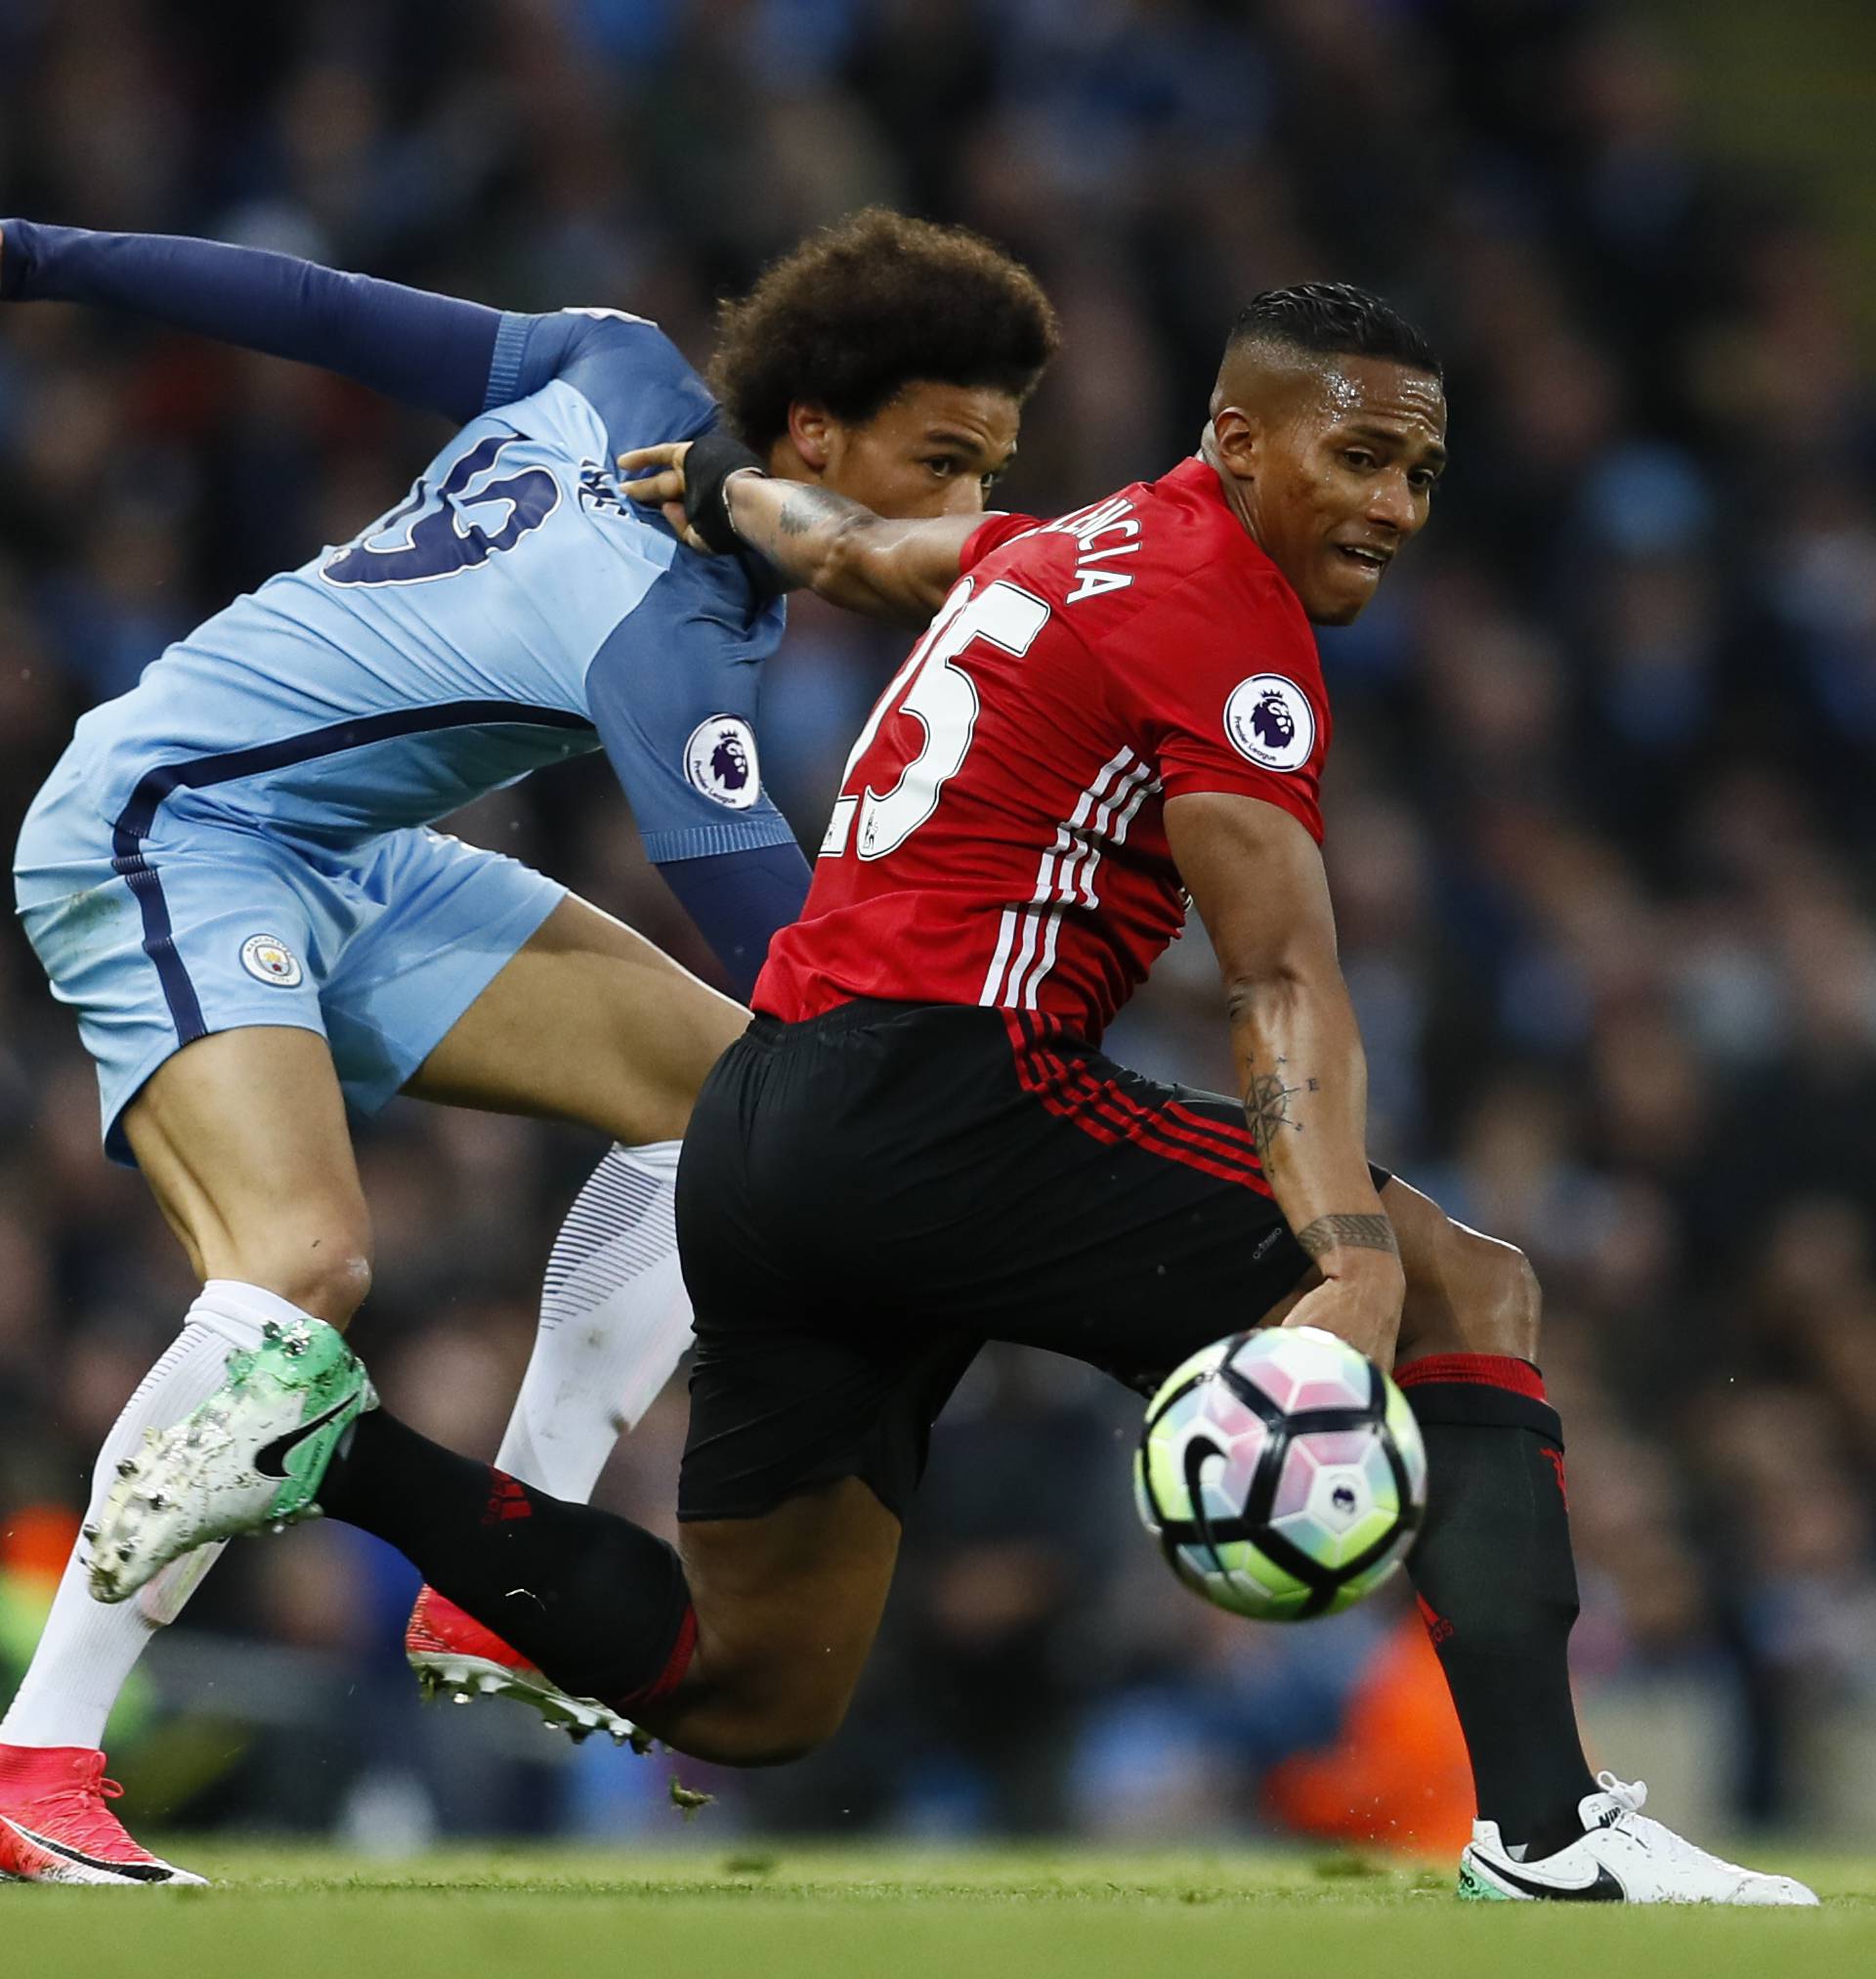 Manchester City's Leroy Sane in action with Manchester United's Antonio Valencia